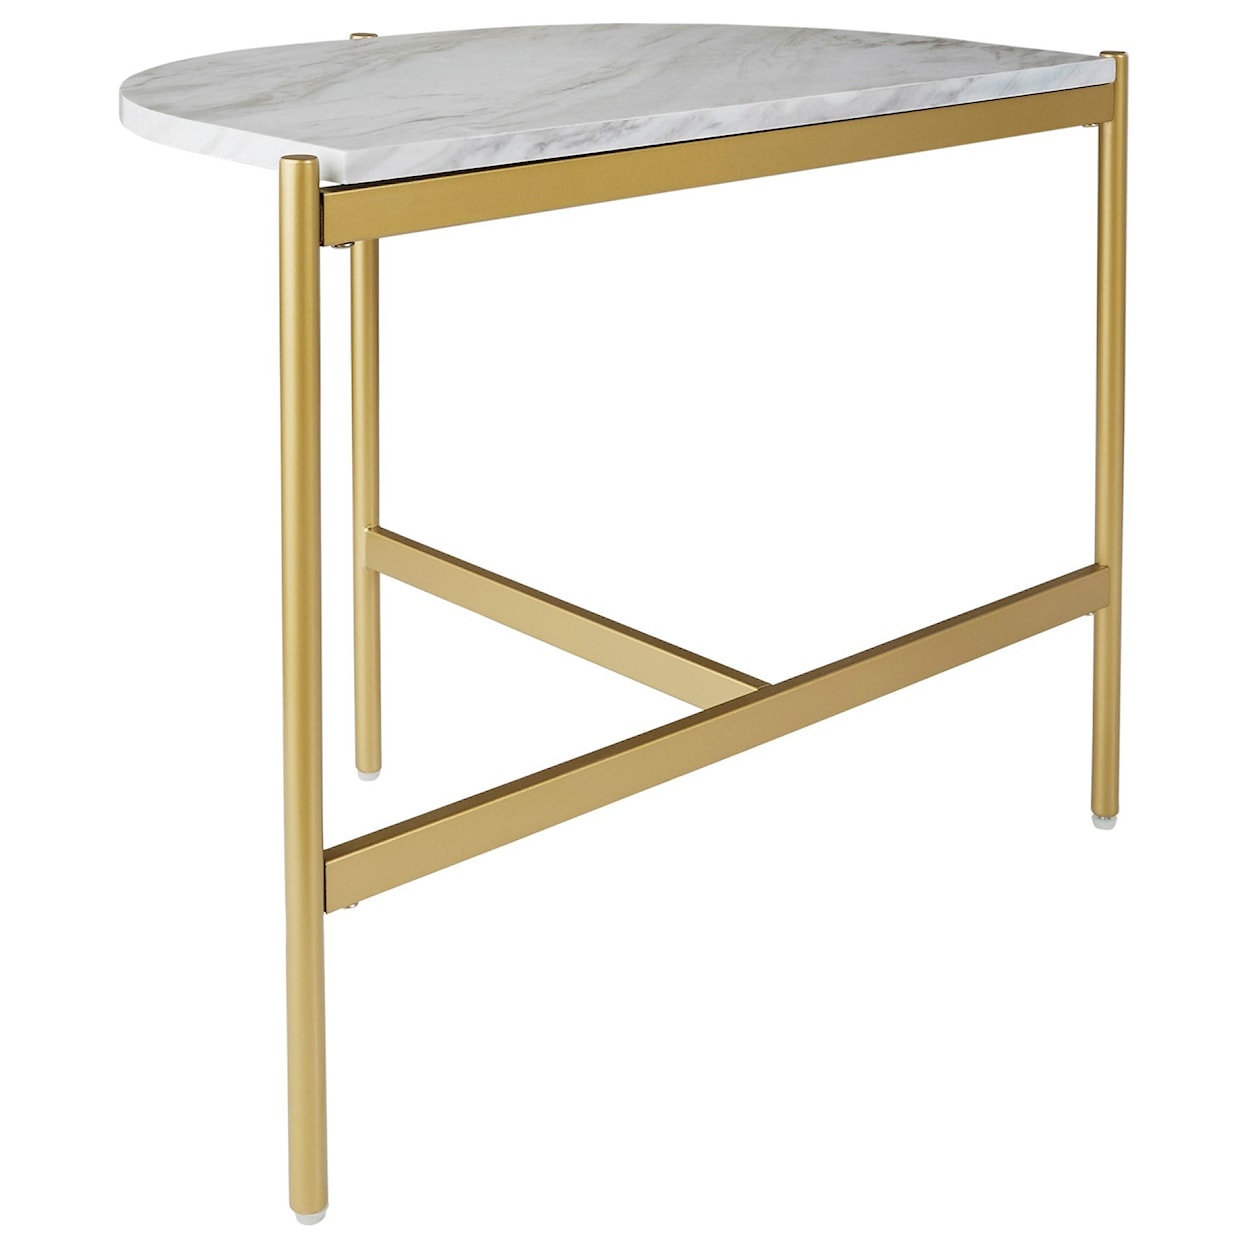 Signature Design by Ashley Wynora | with End Marble Chair Faux Top Gold Table Side HomeWorld Finish Tables End | Half-Round T192-7 Furniture